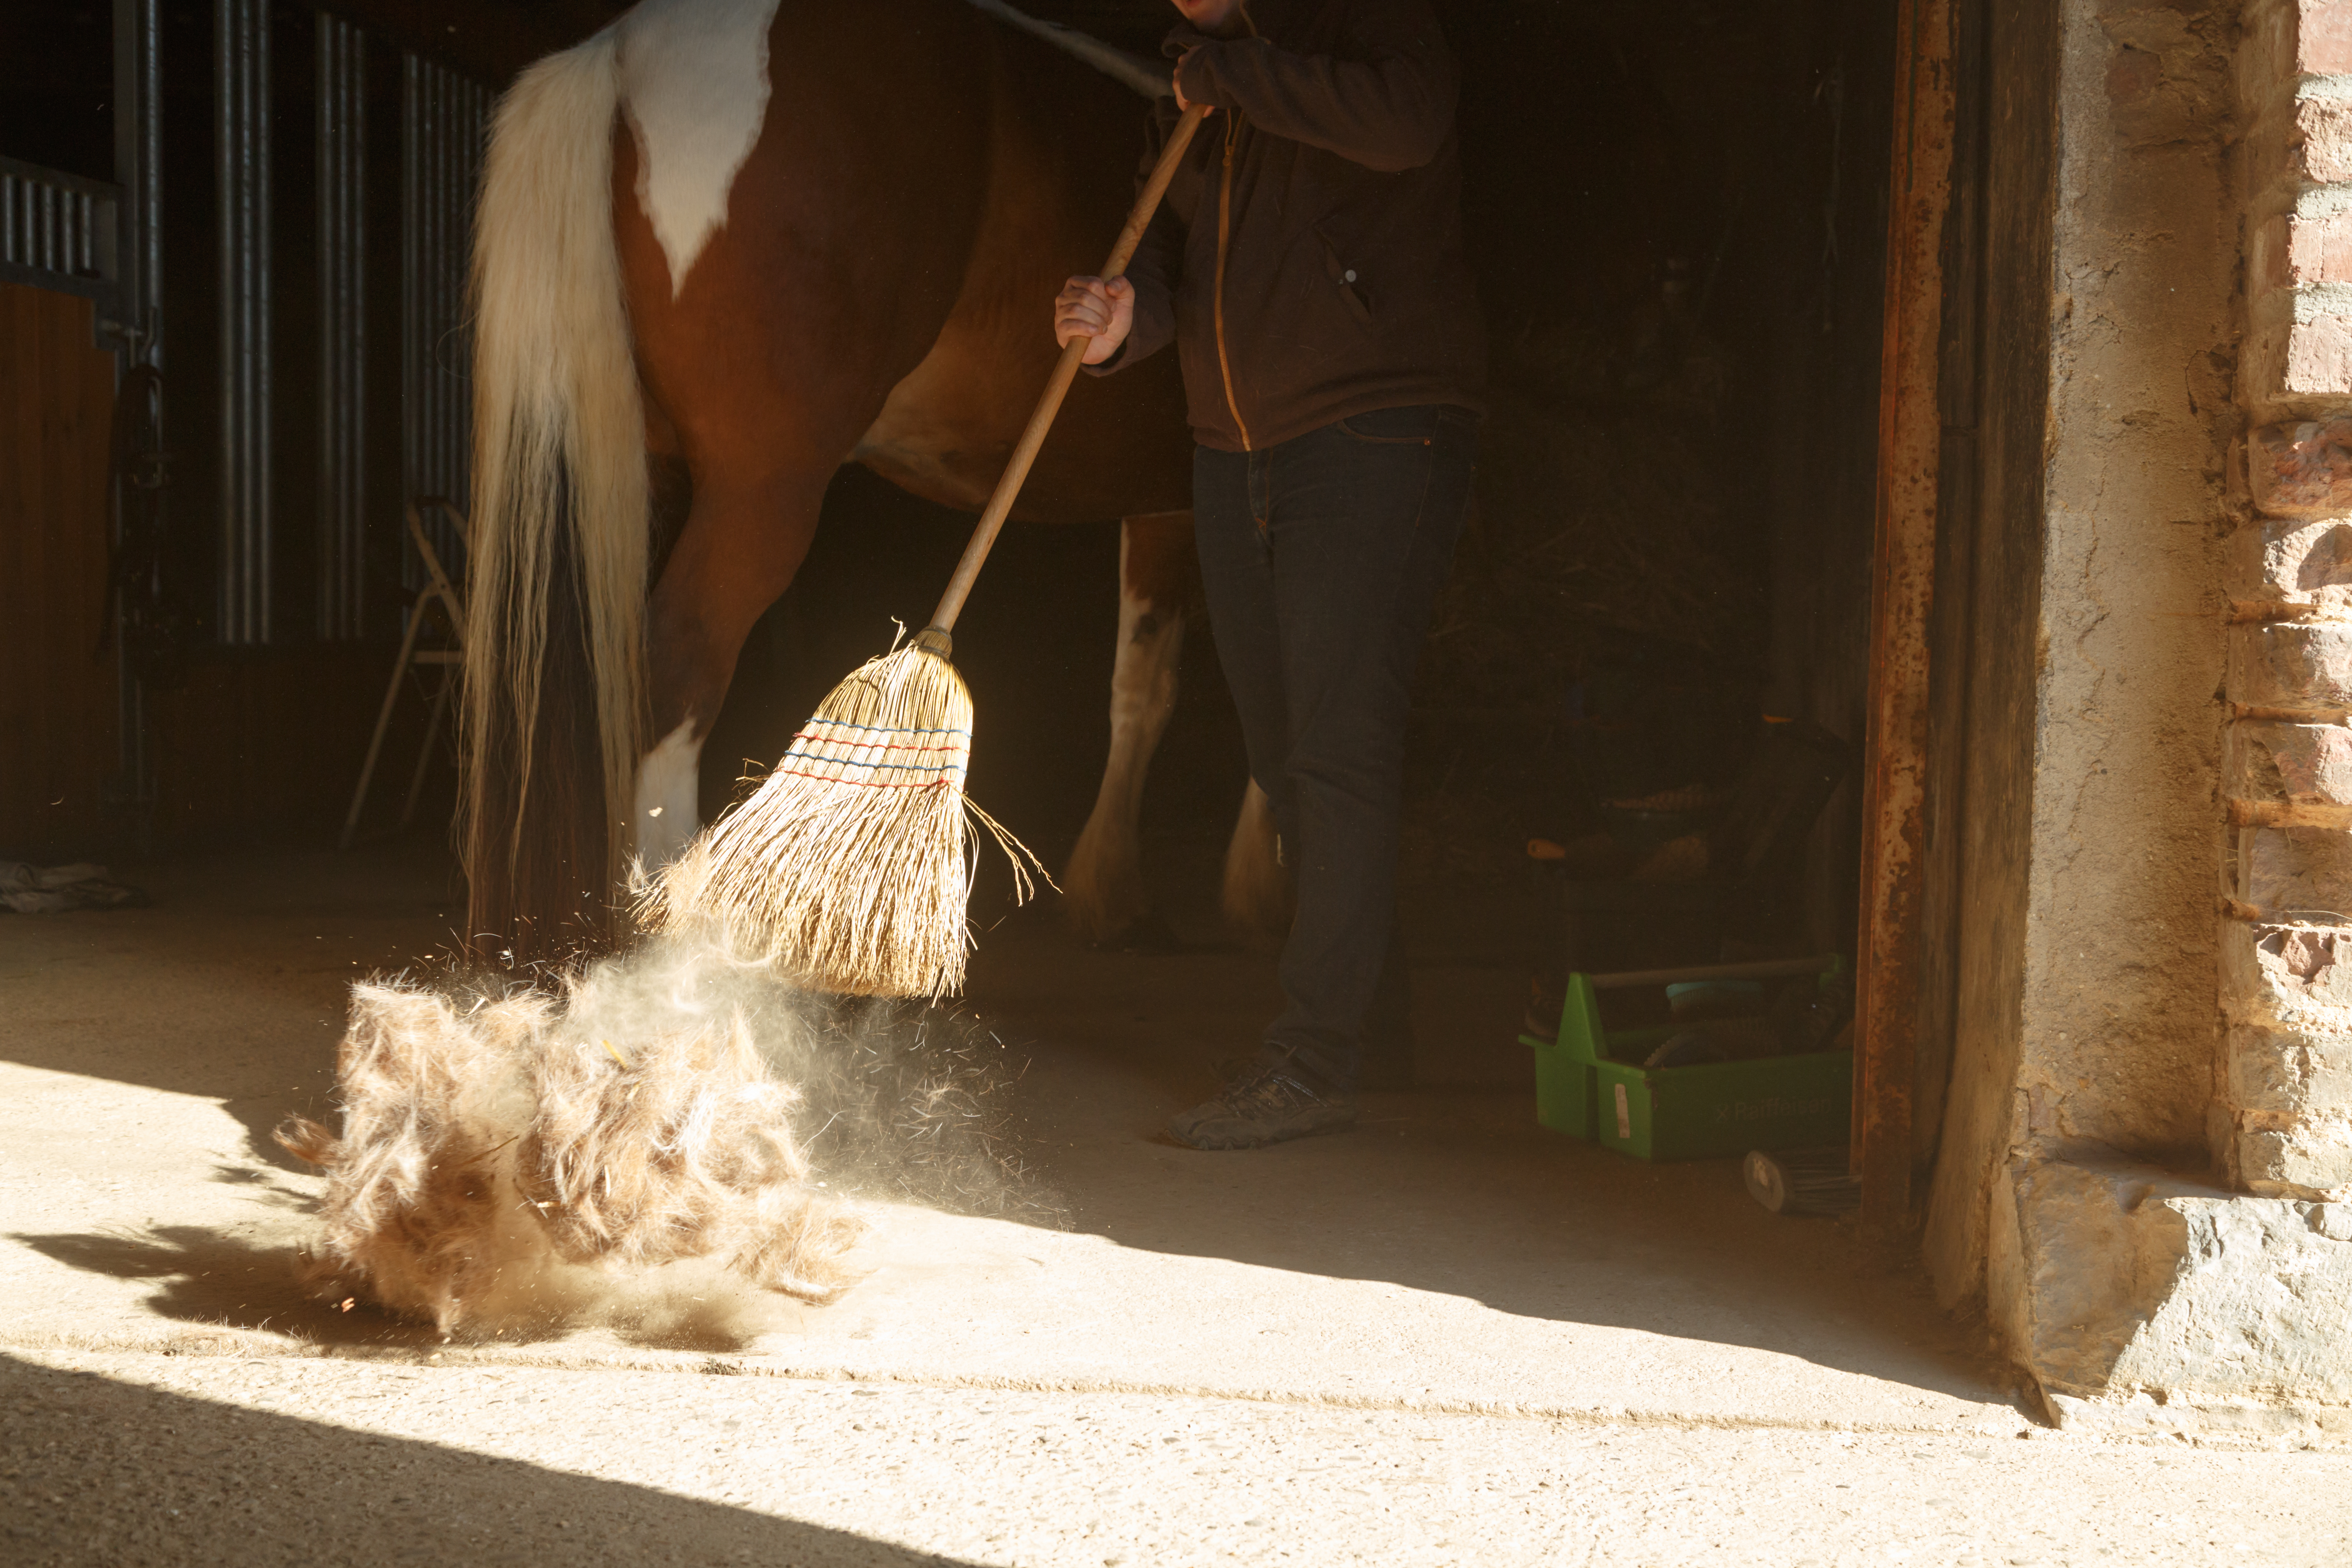 Woman sweeping dirt out of a barn aisle